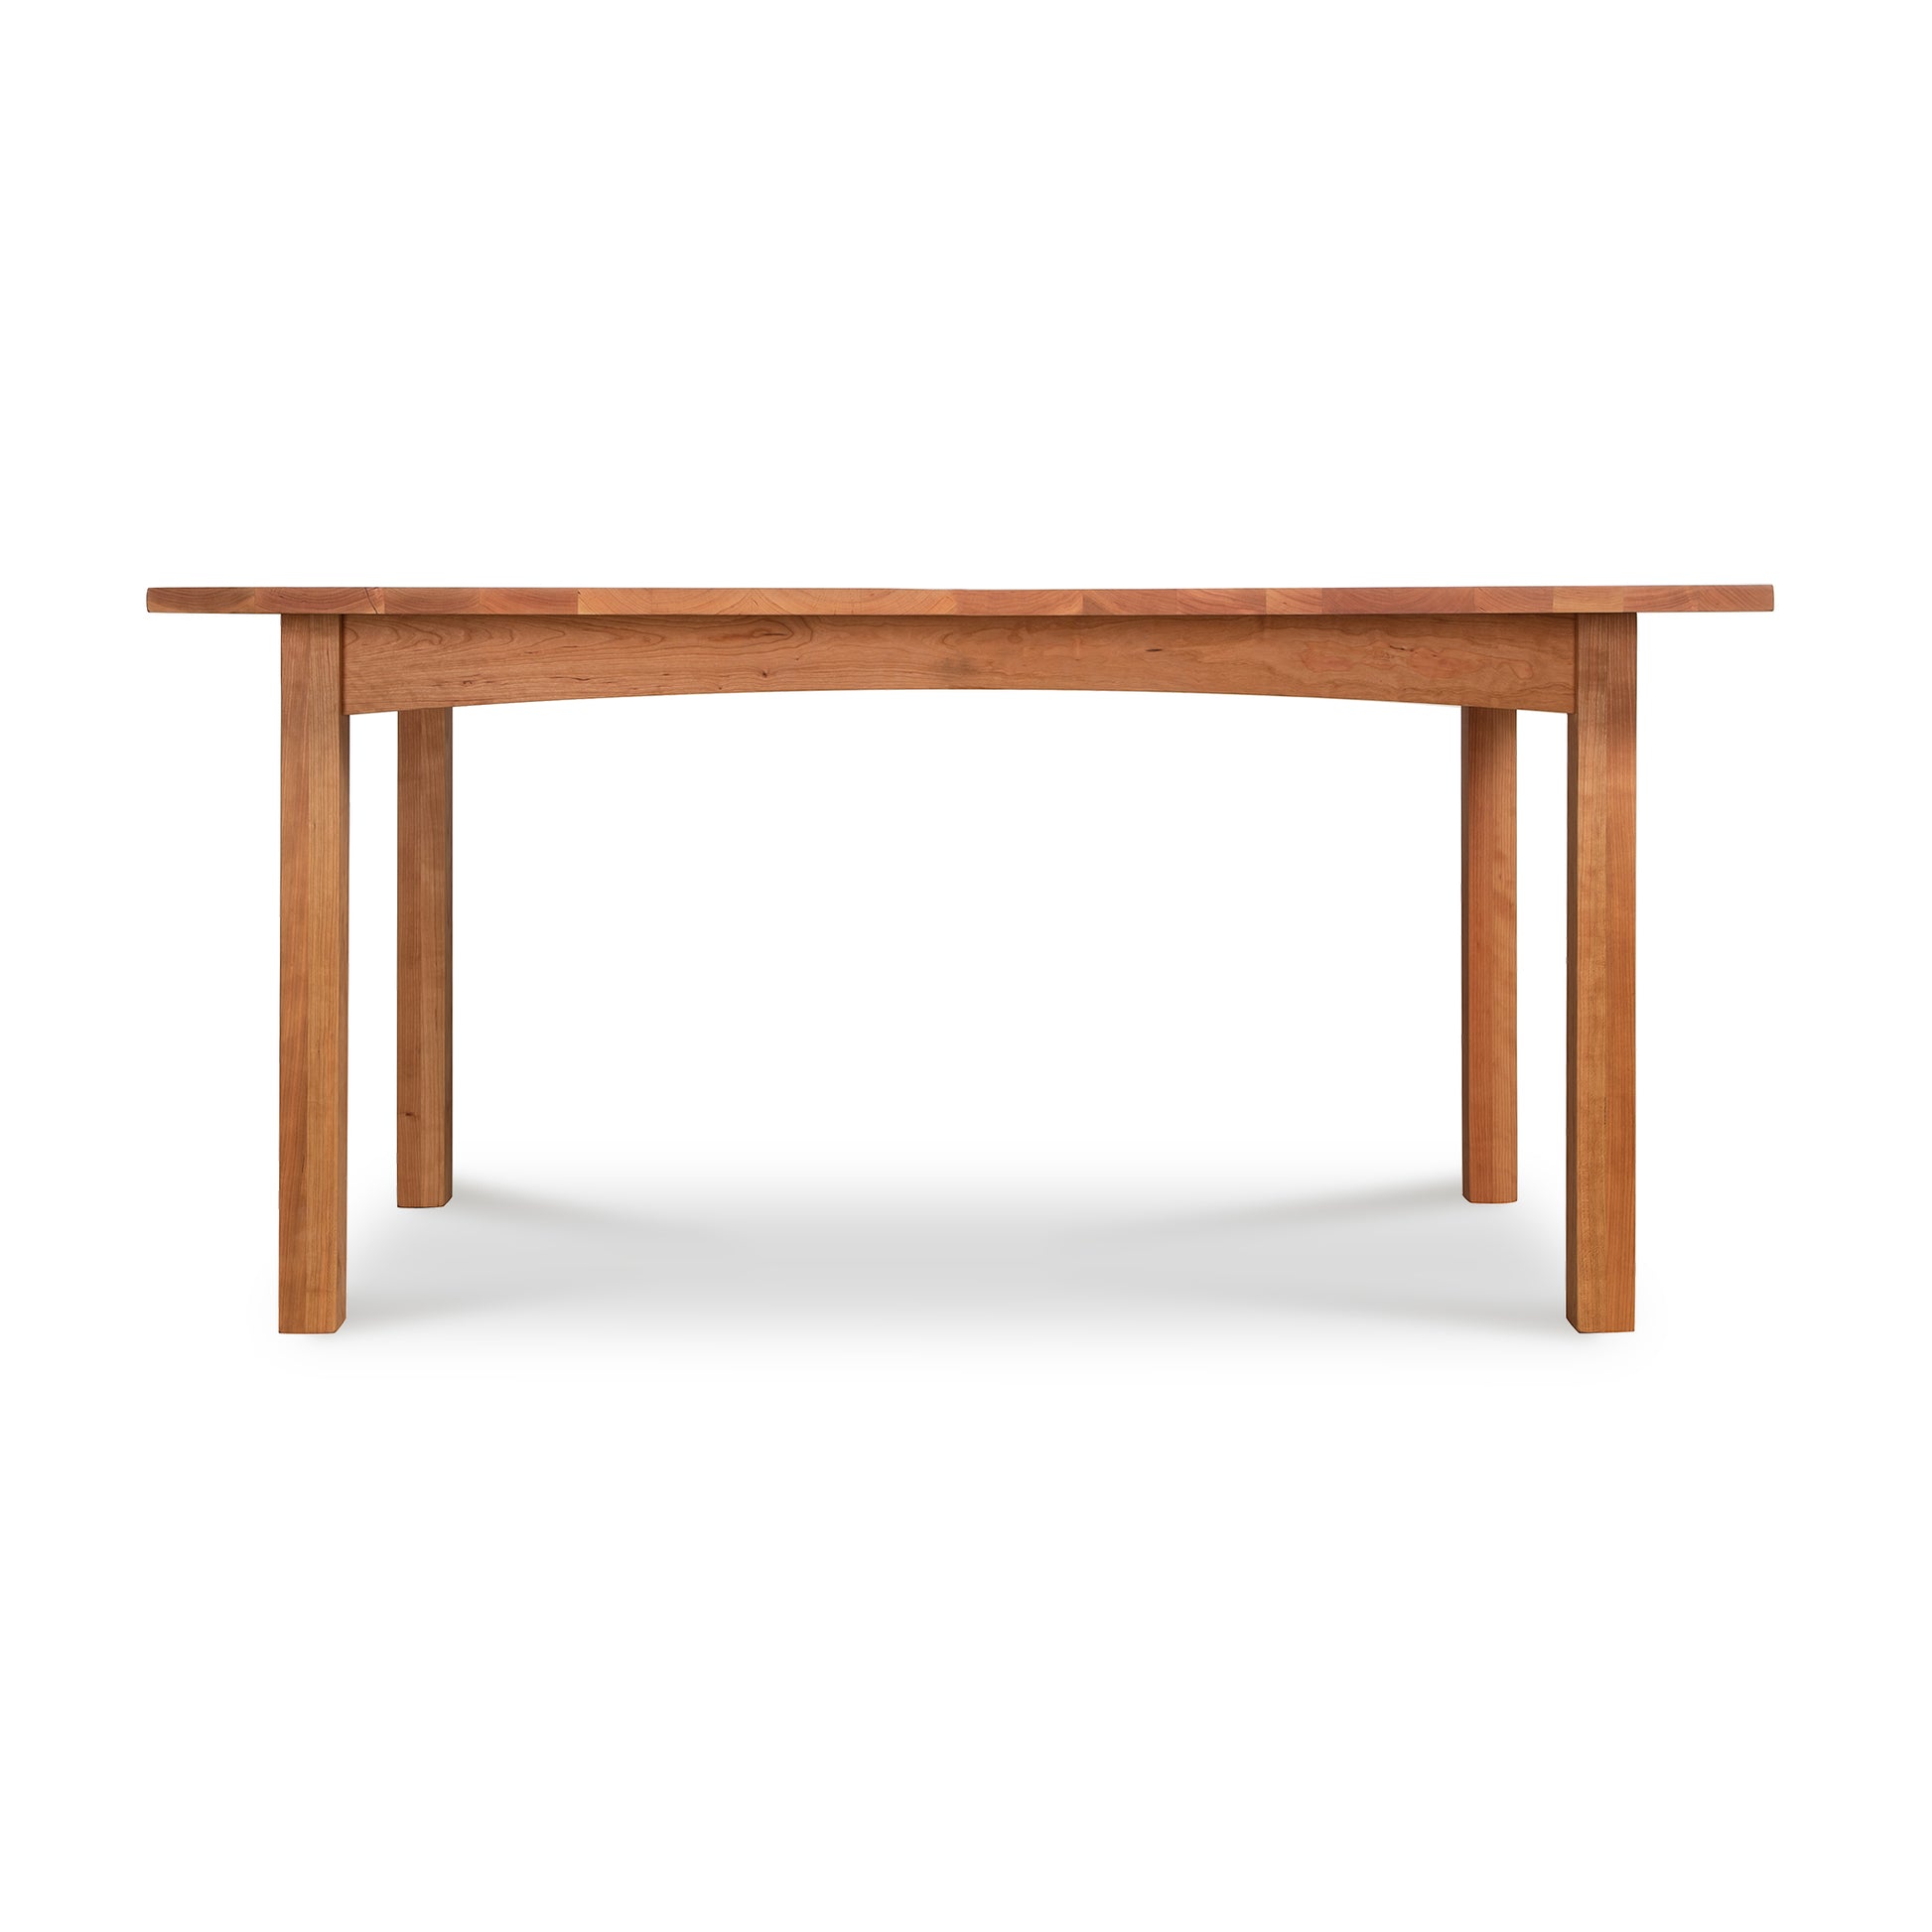 A Burlington Shaker Solid Top Dining Table by Vermont Furniture Designs with four legs on a white background.